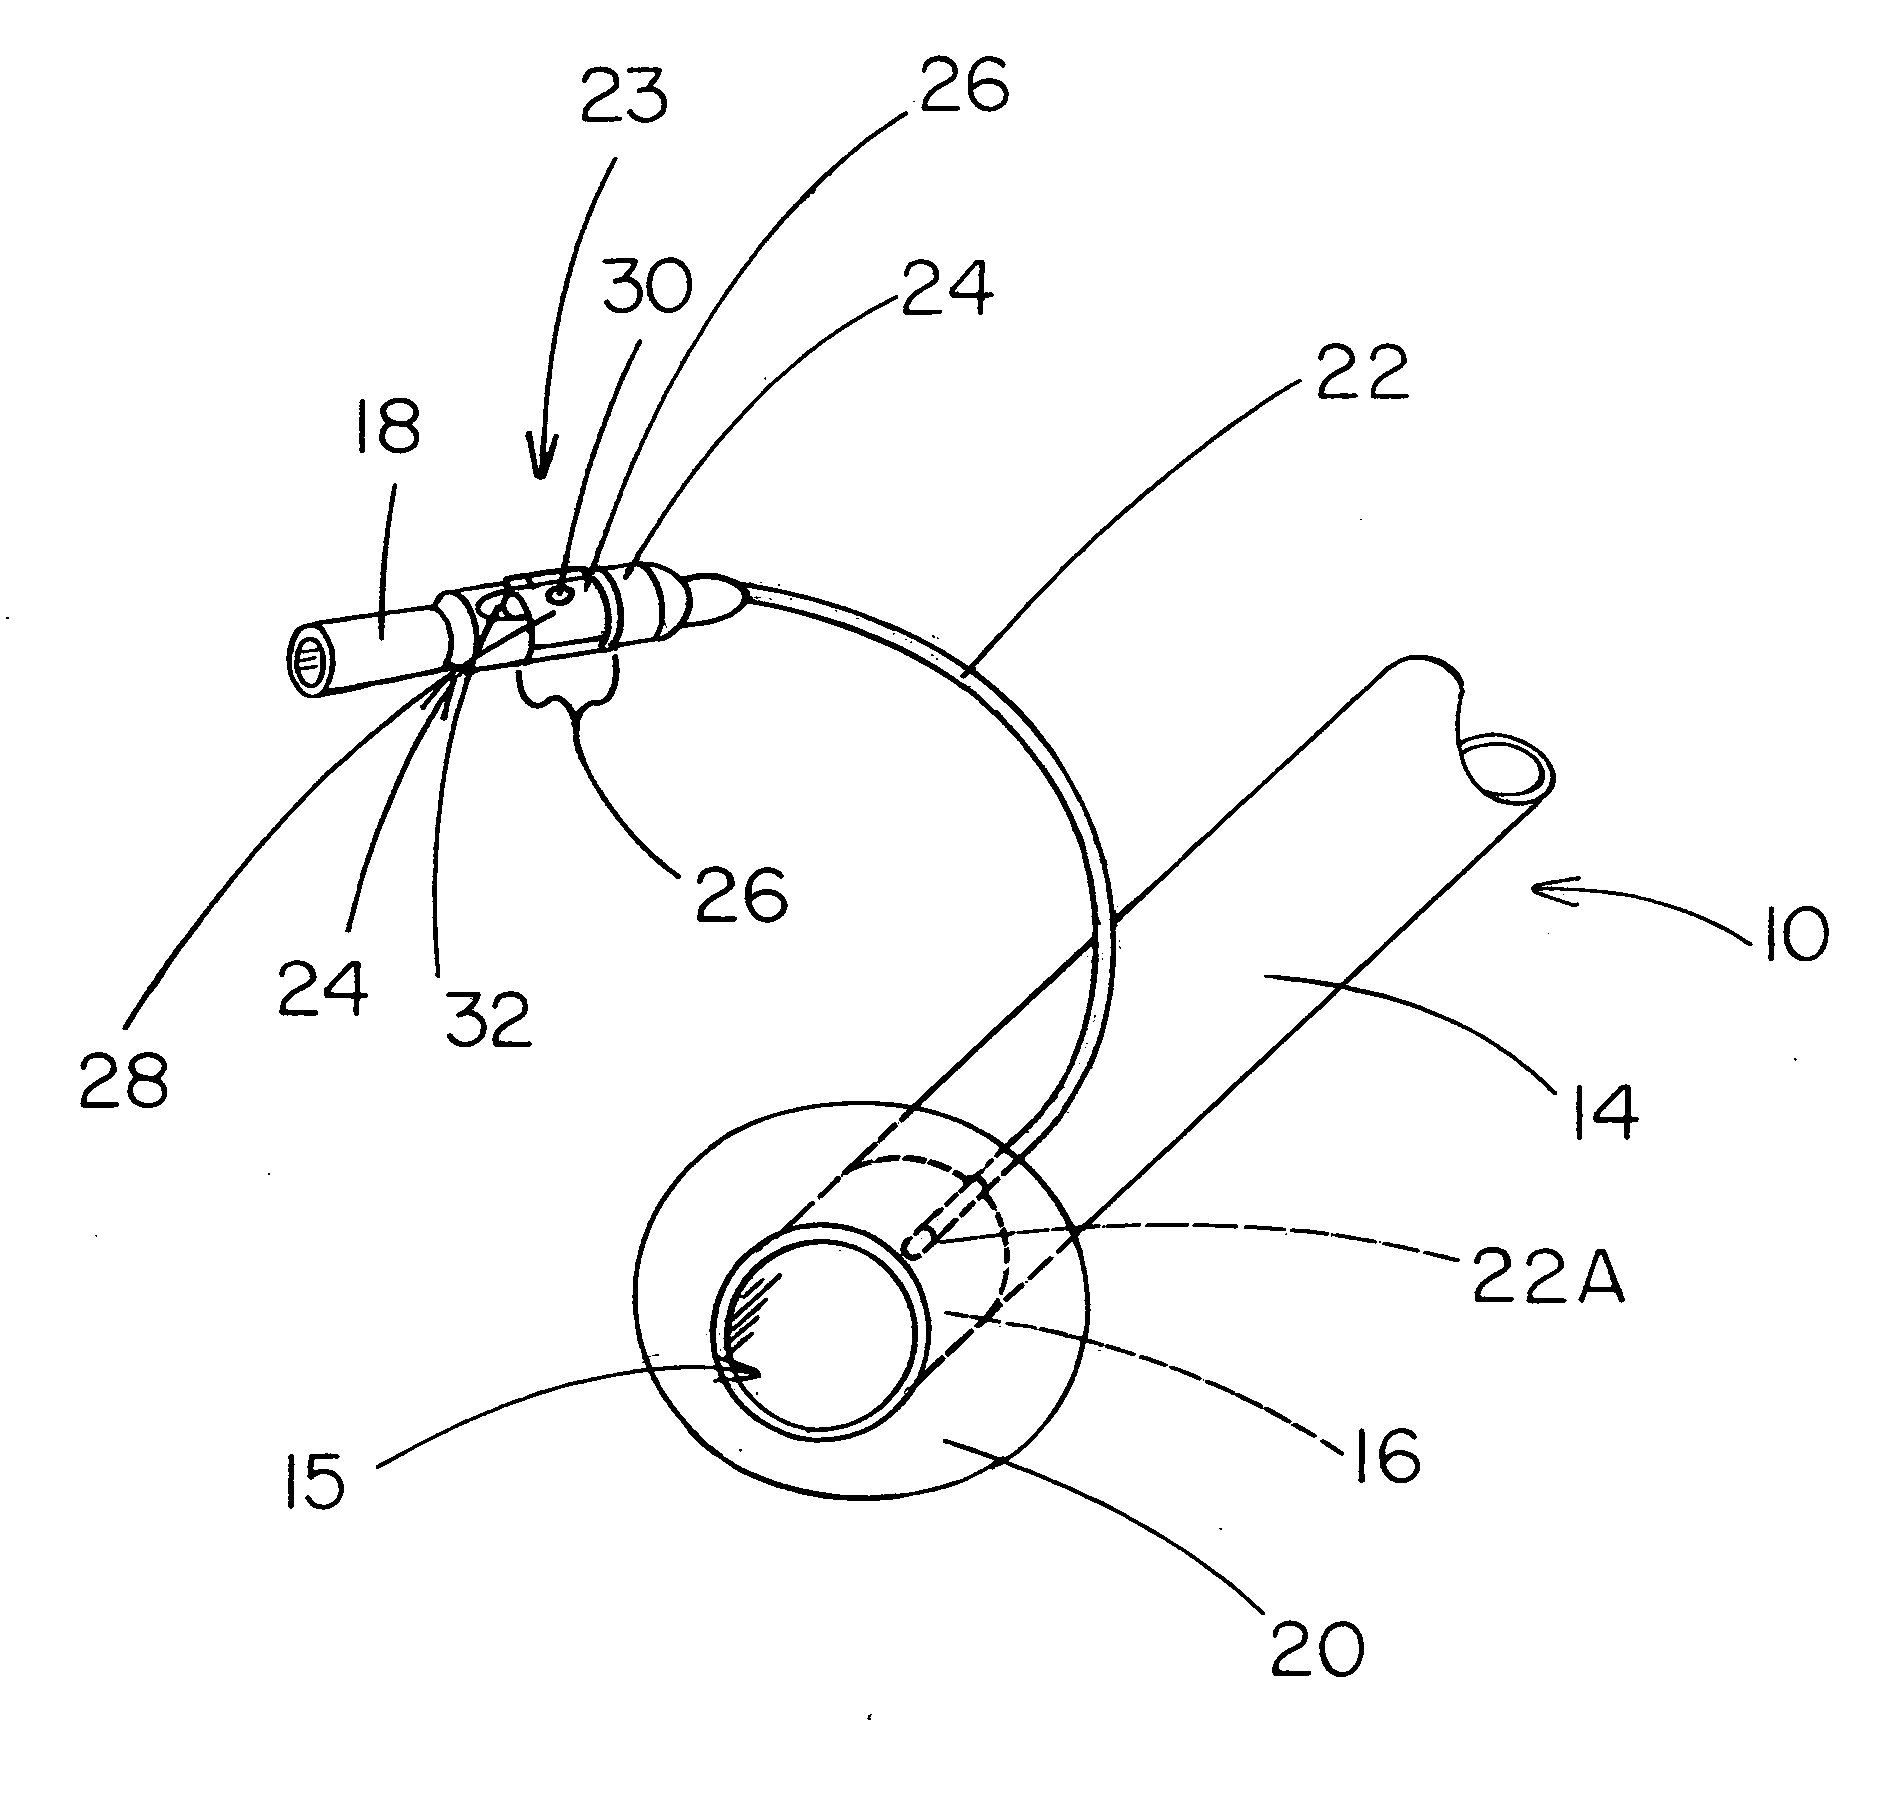 Combined fixed volume retention cuff and relief valve